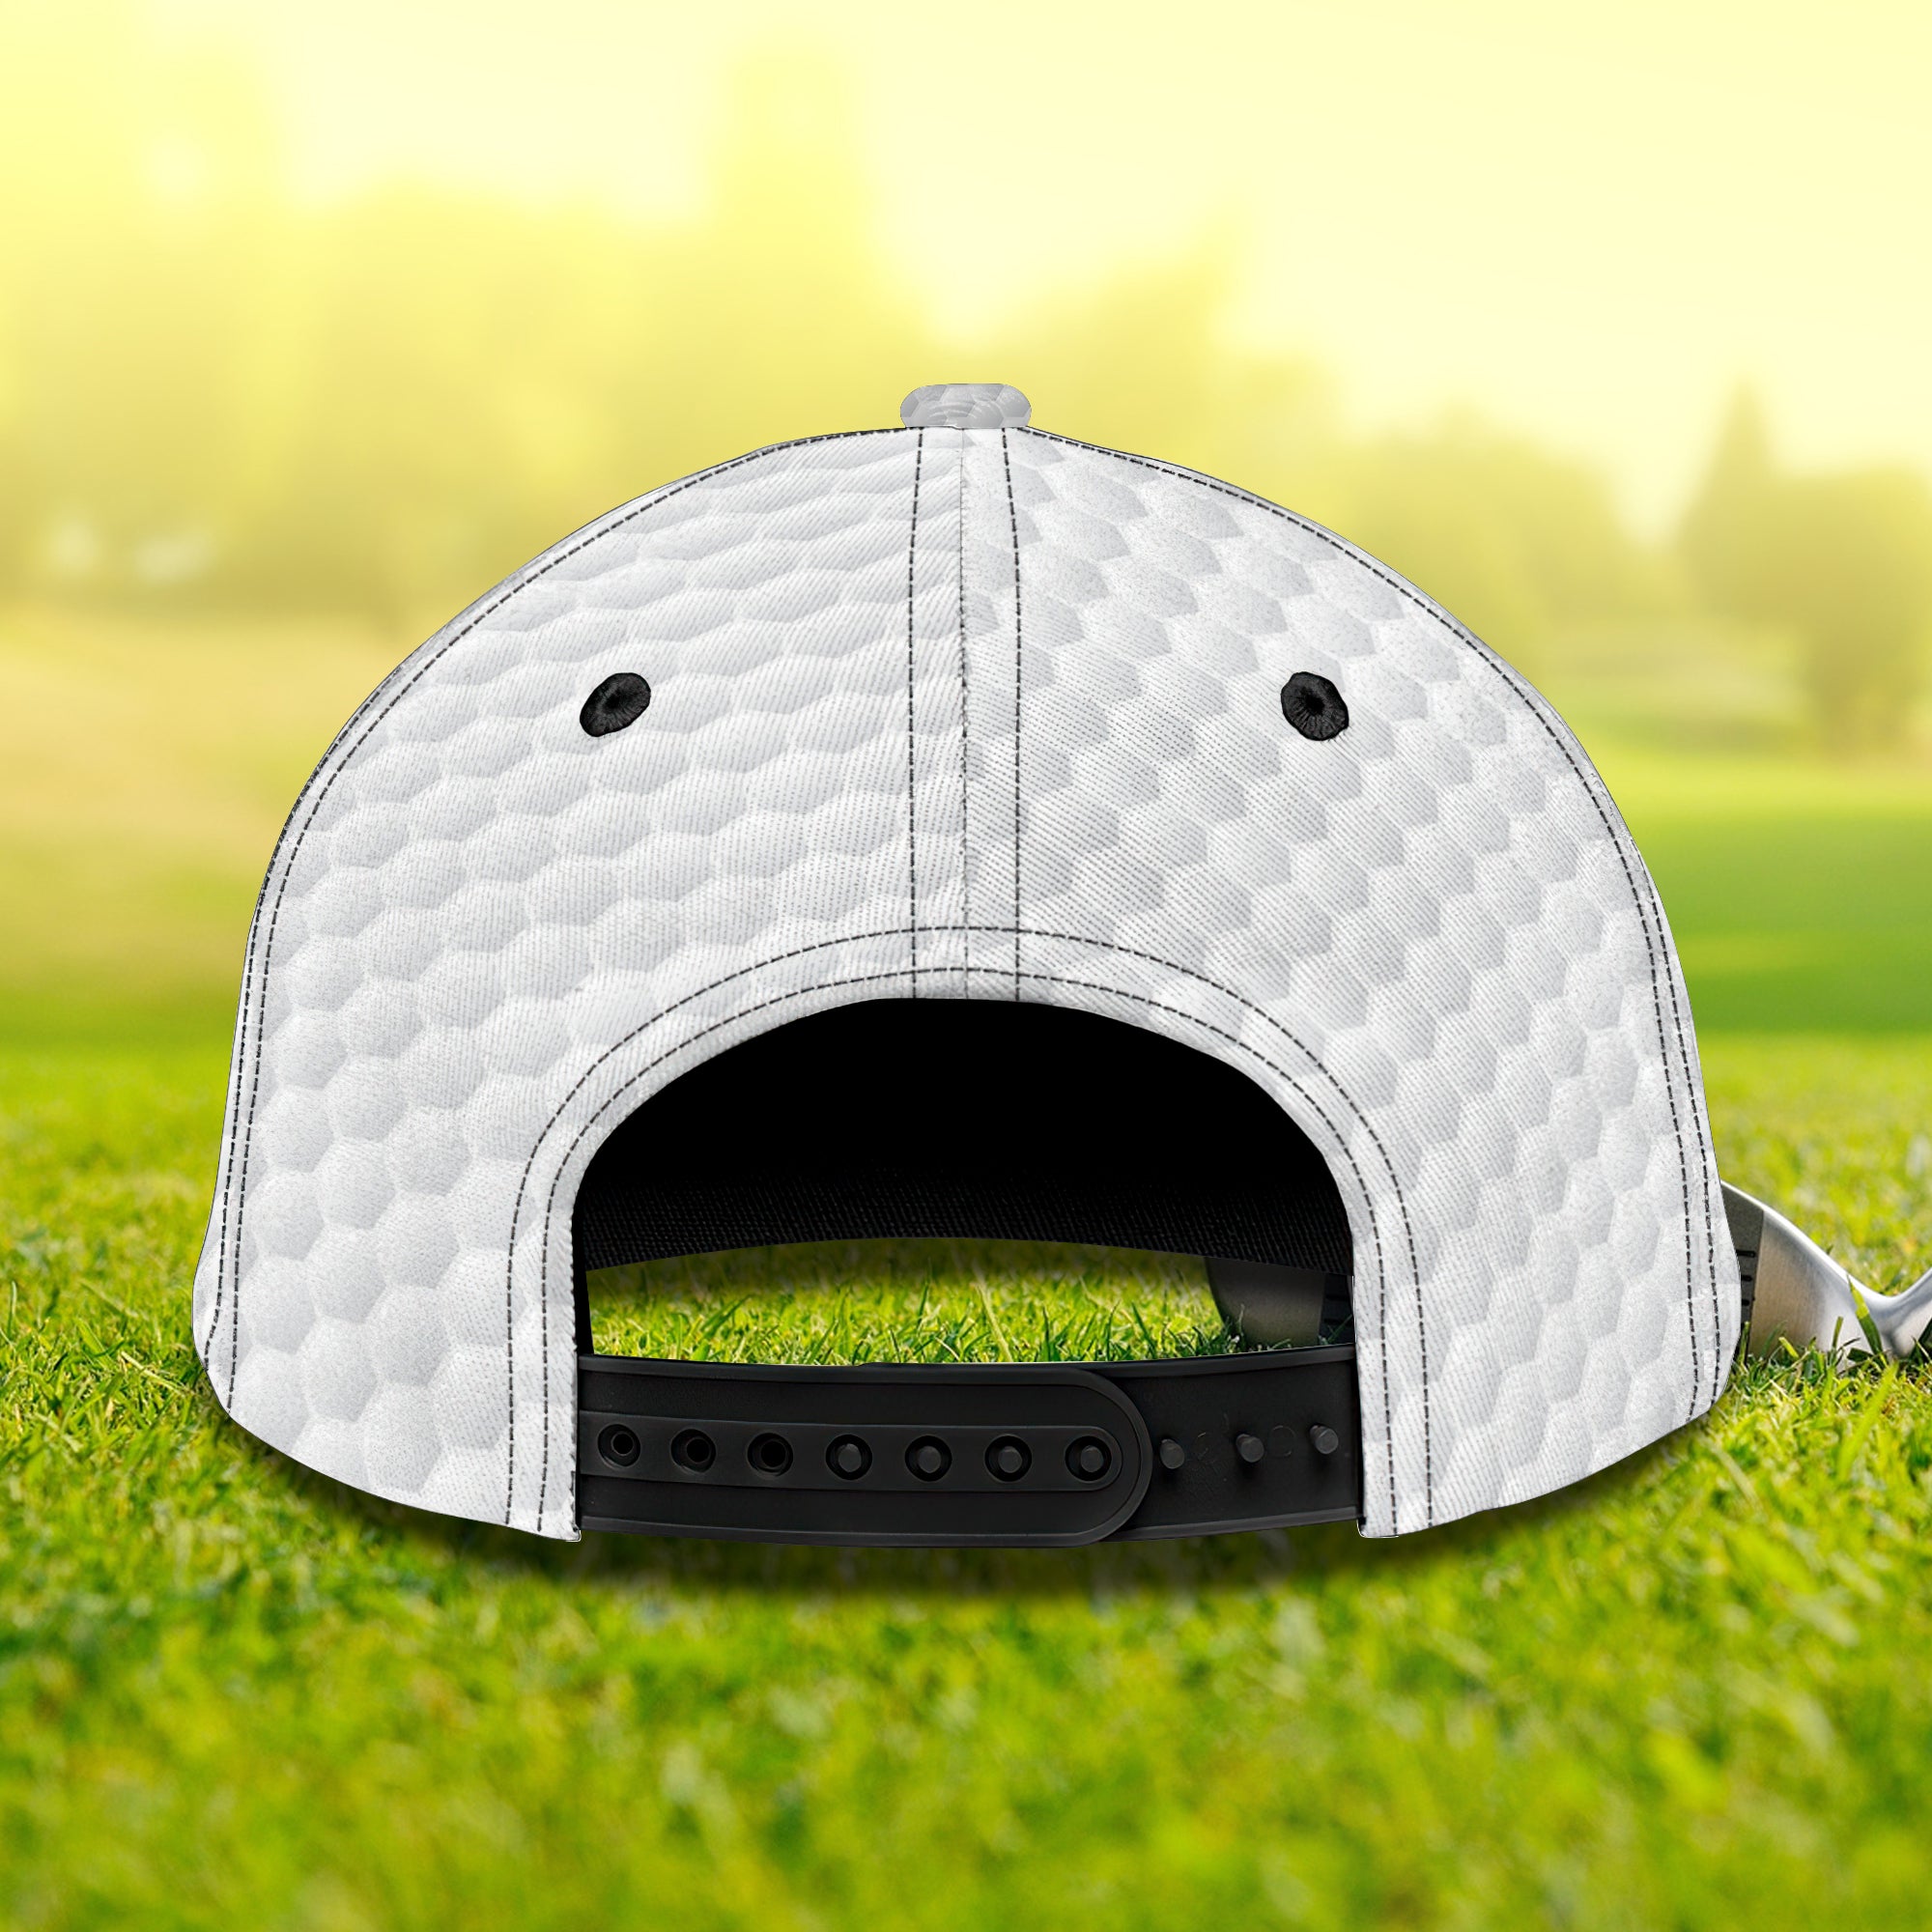 GOLF CAP2 - Personalized Name Cap - BY97